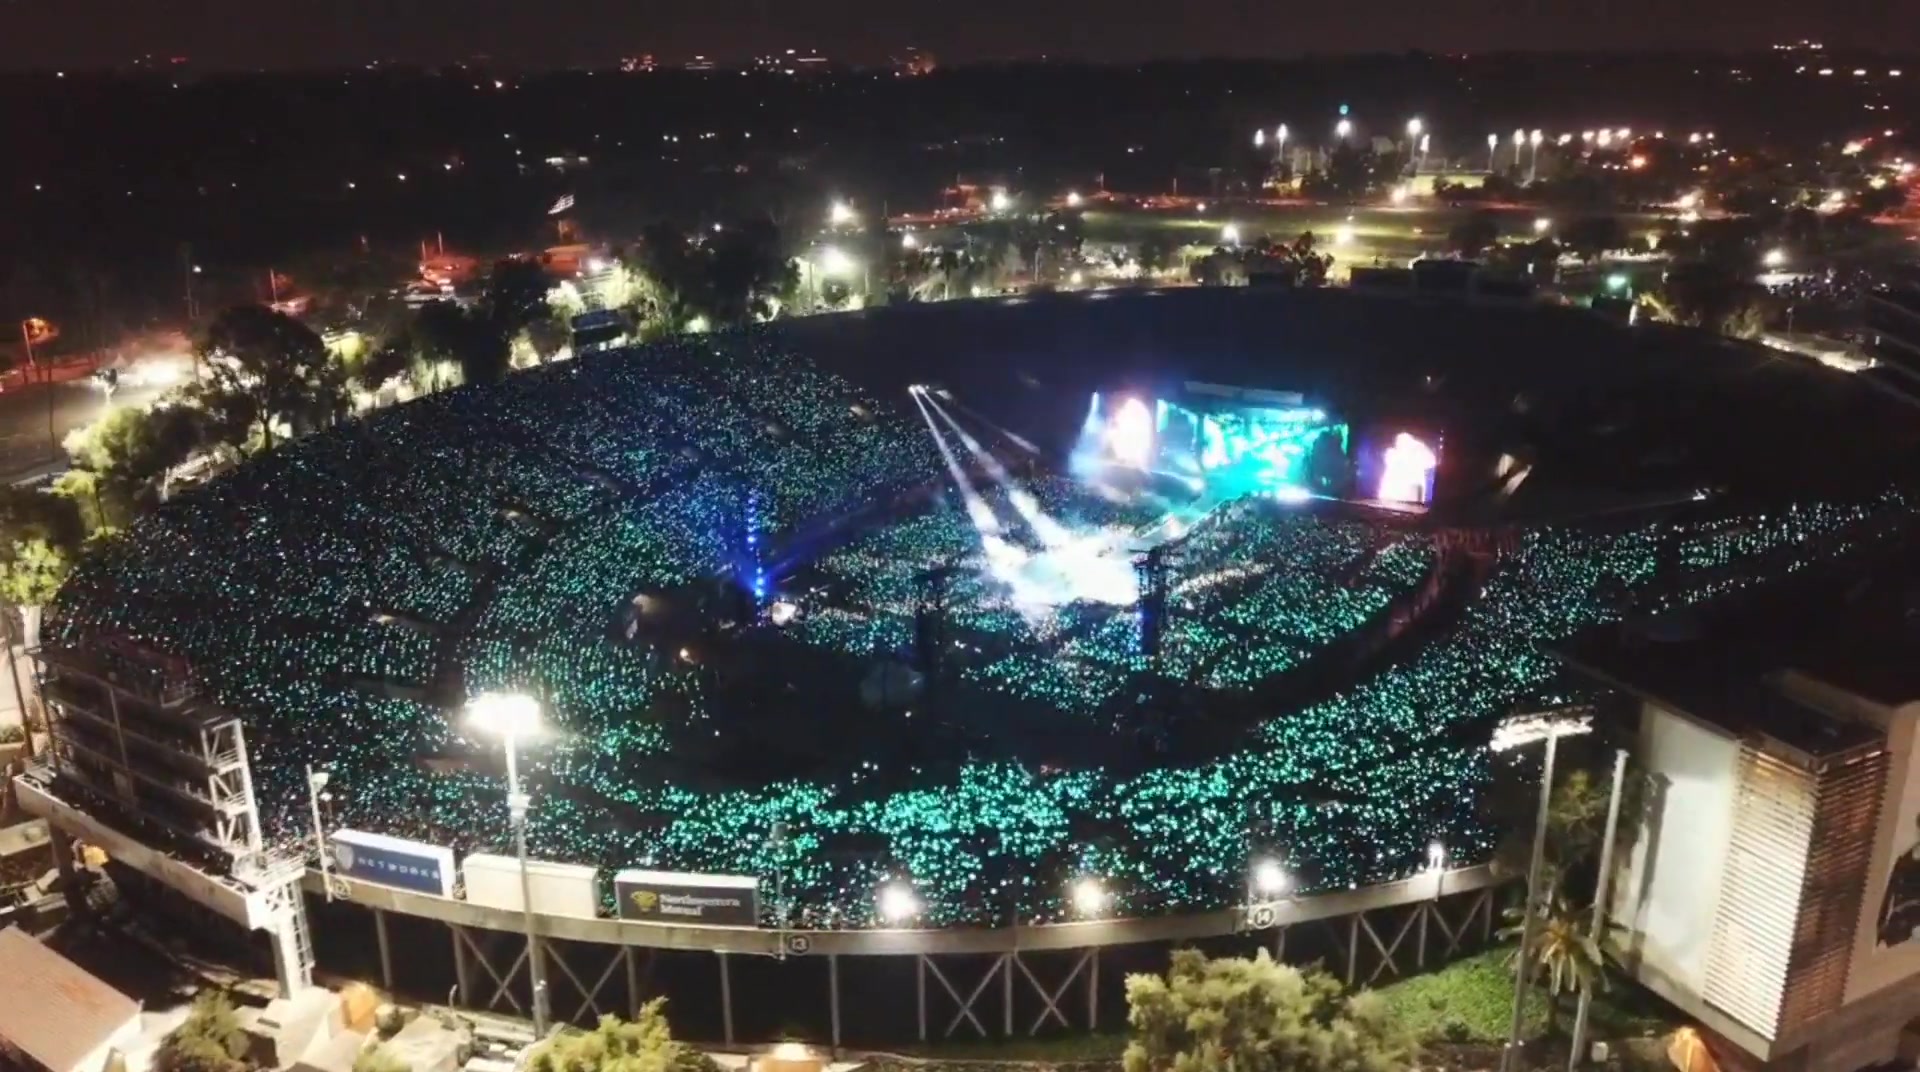 Drone Shots Of Bts World Tour Concert At The Rose Bowl - Bilibili